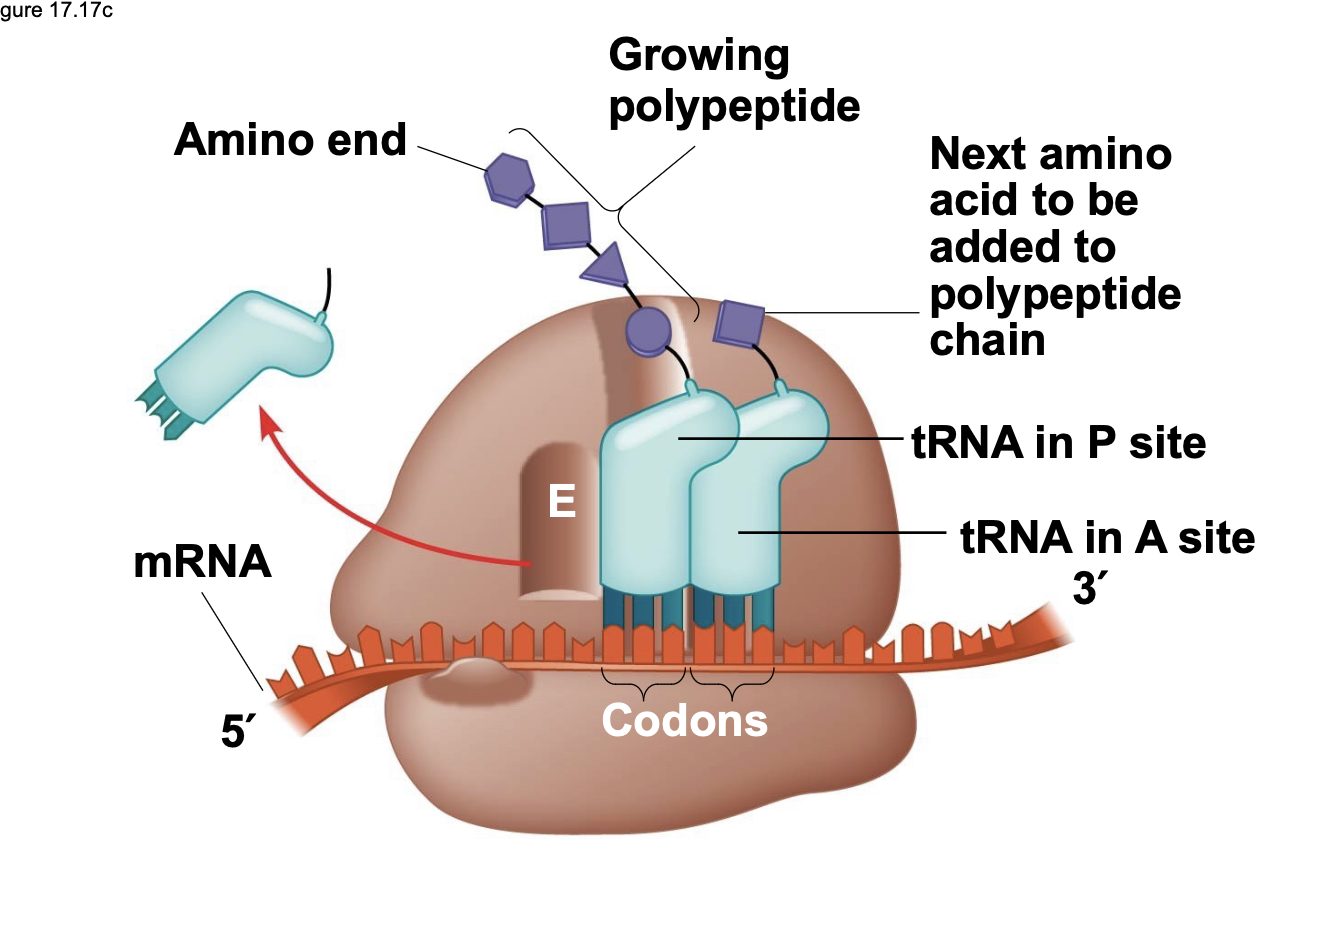 <p>A ribosome has three binding sites for tRNA \n ▪ The P site holds the tRNA that has the growing polypeptide chain covalently attached to its 3 ́ end \n ▪ The A site holds the tRNA that has the next amino acid to be added to the chain attached to its 3 ́ end \n ▪ The E site is the exit site, where tRNAs that were previously in the P site will leave the ribosome after the growing polypeptide is transferred to the next tRNA</p>